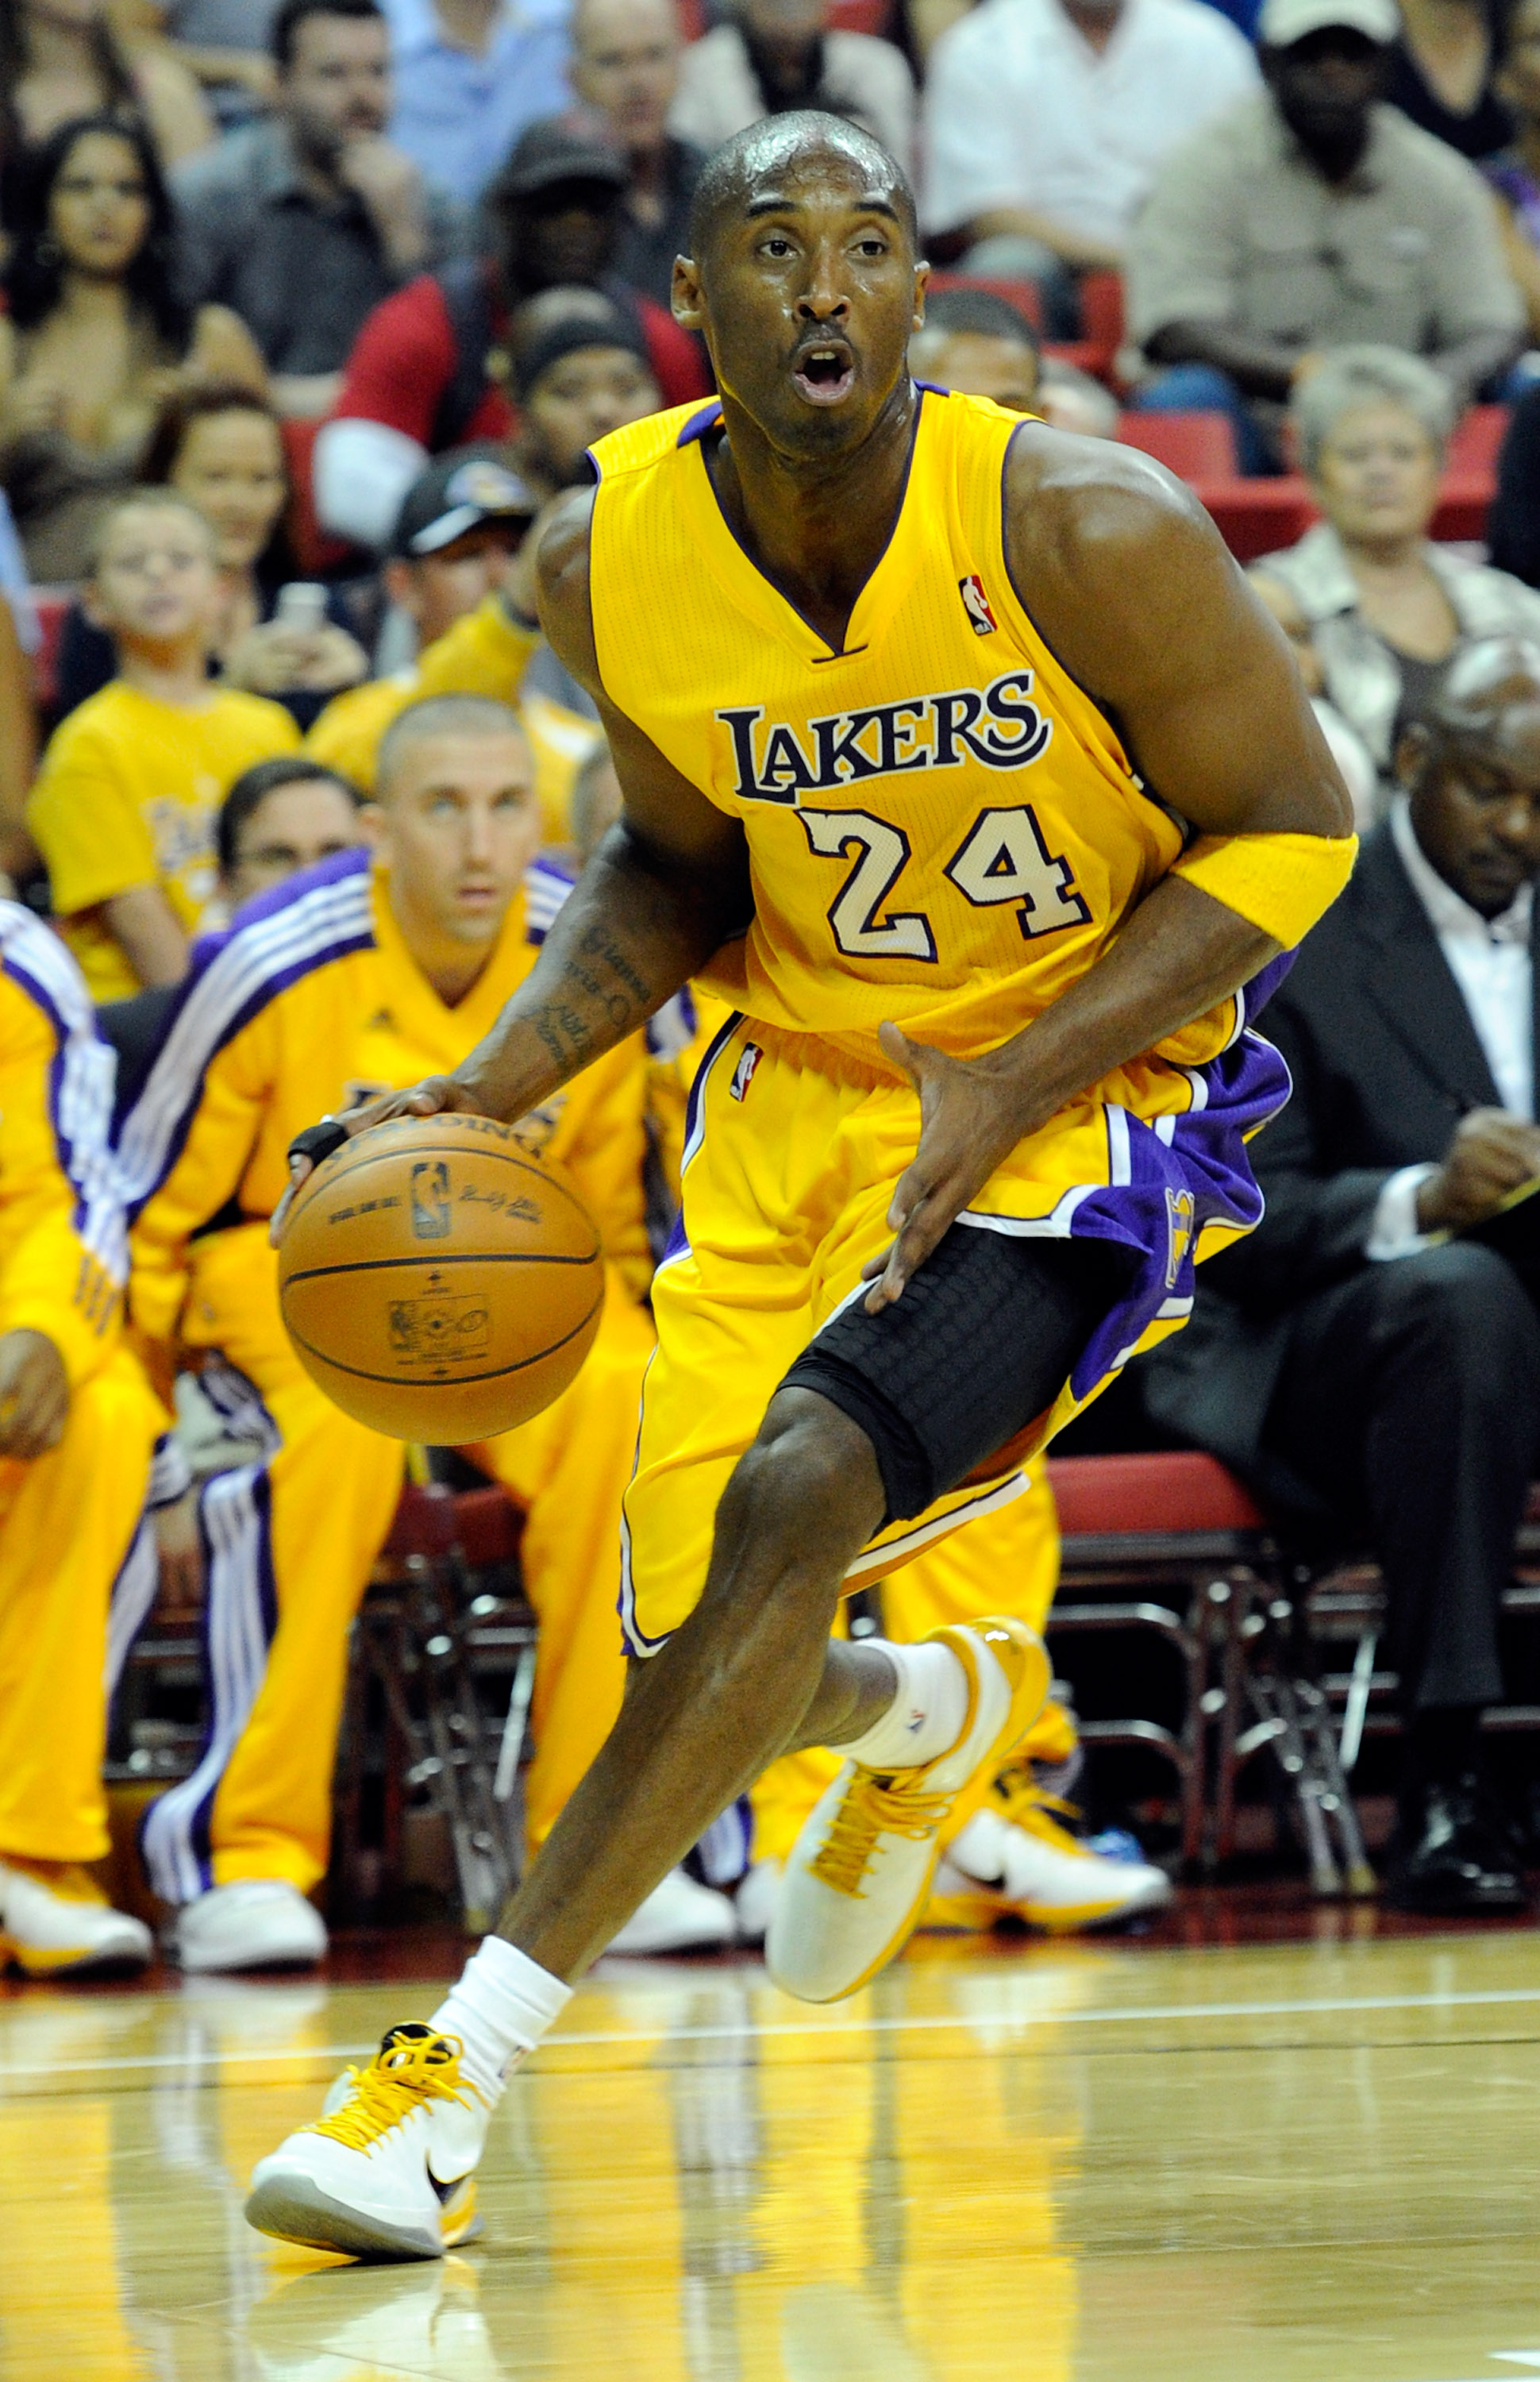 NBA official Champion 52 Lakers jersey #8 Bryant. Believe its a